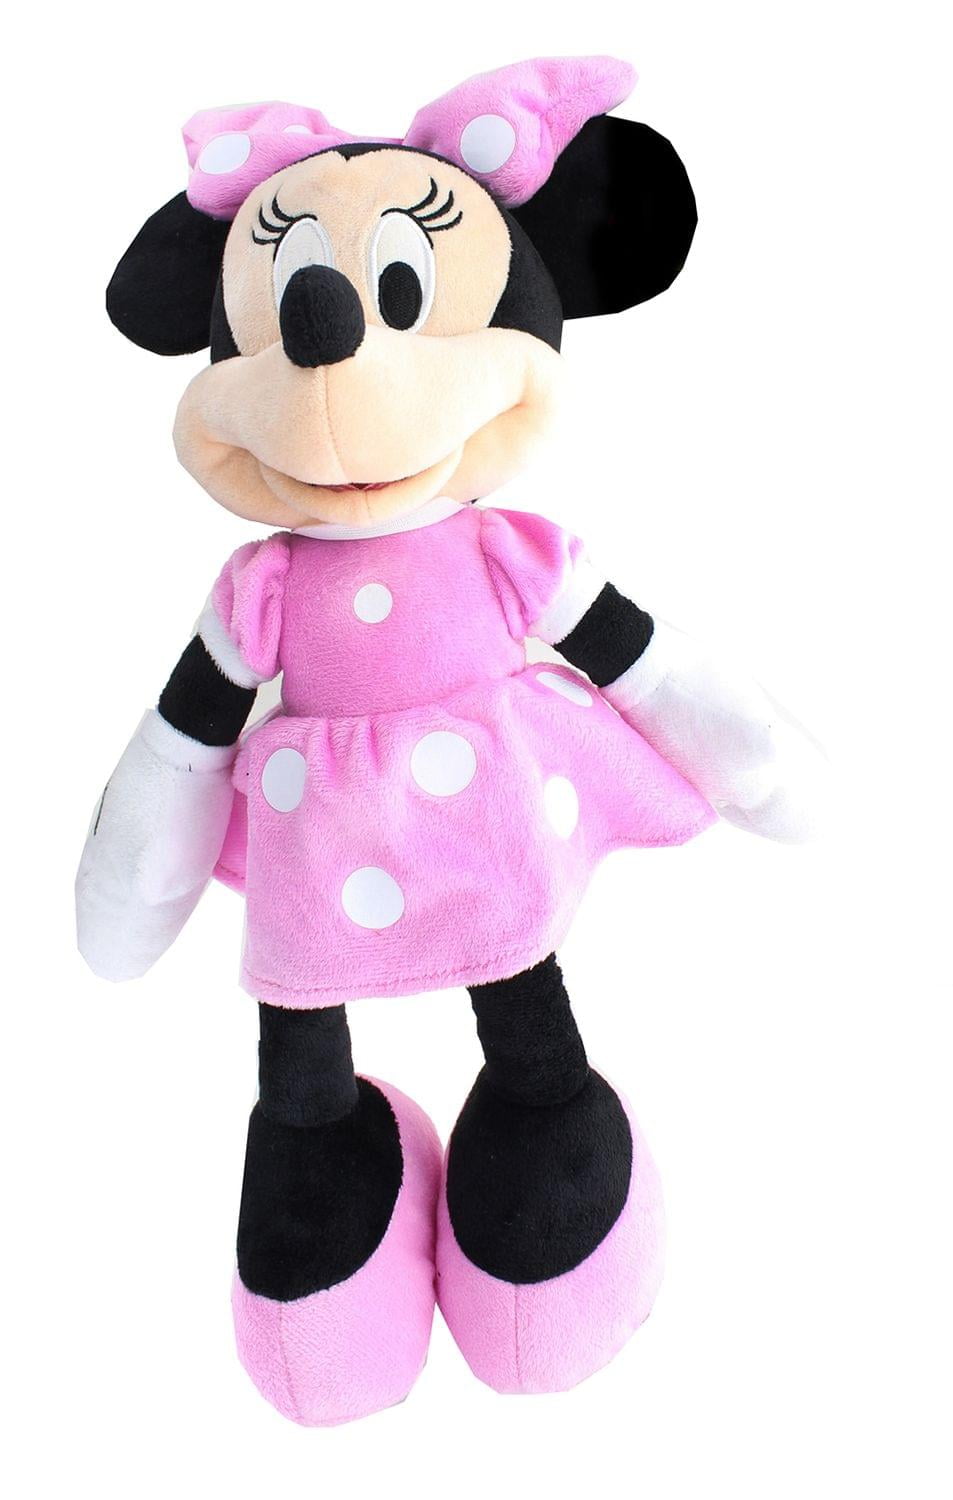 New Disney Store Clubhouse Minnie Mouse Bean Bag Plush 9" Pink Doll